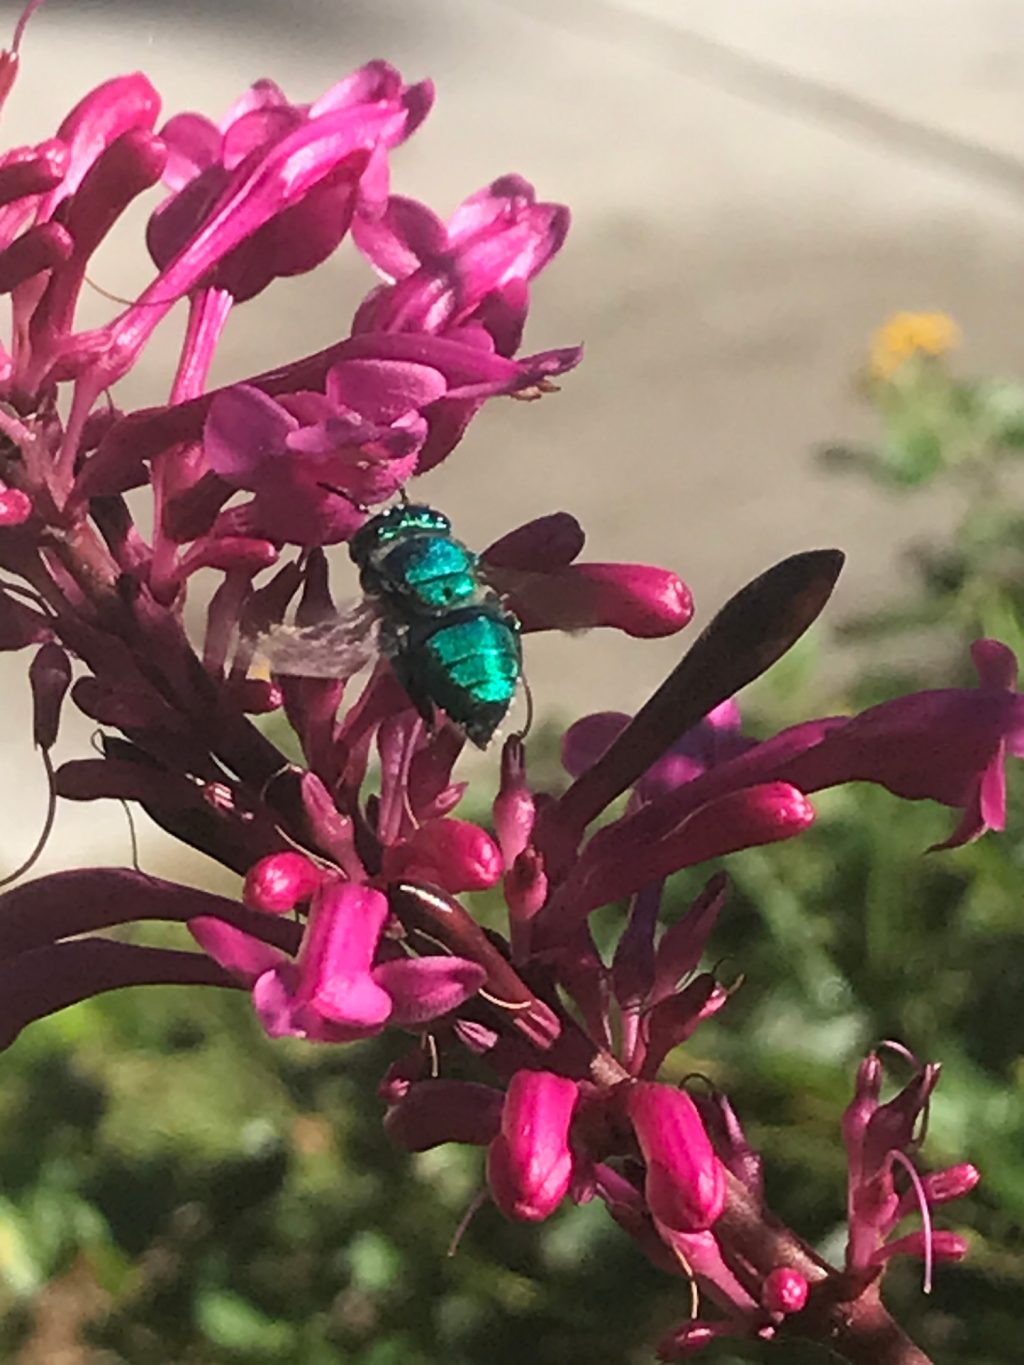 Iridescent green bee sits among many small deep pink flowers